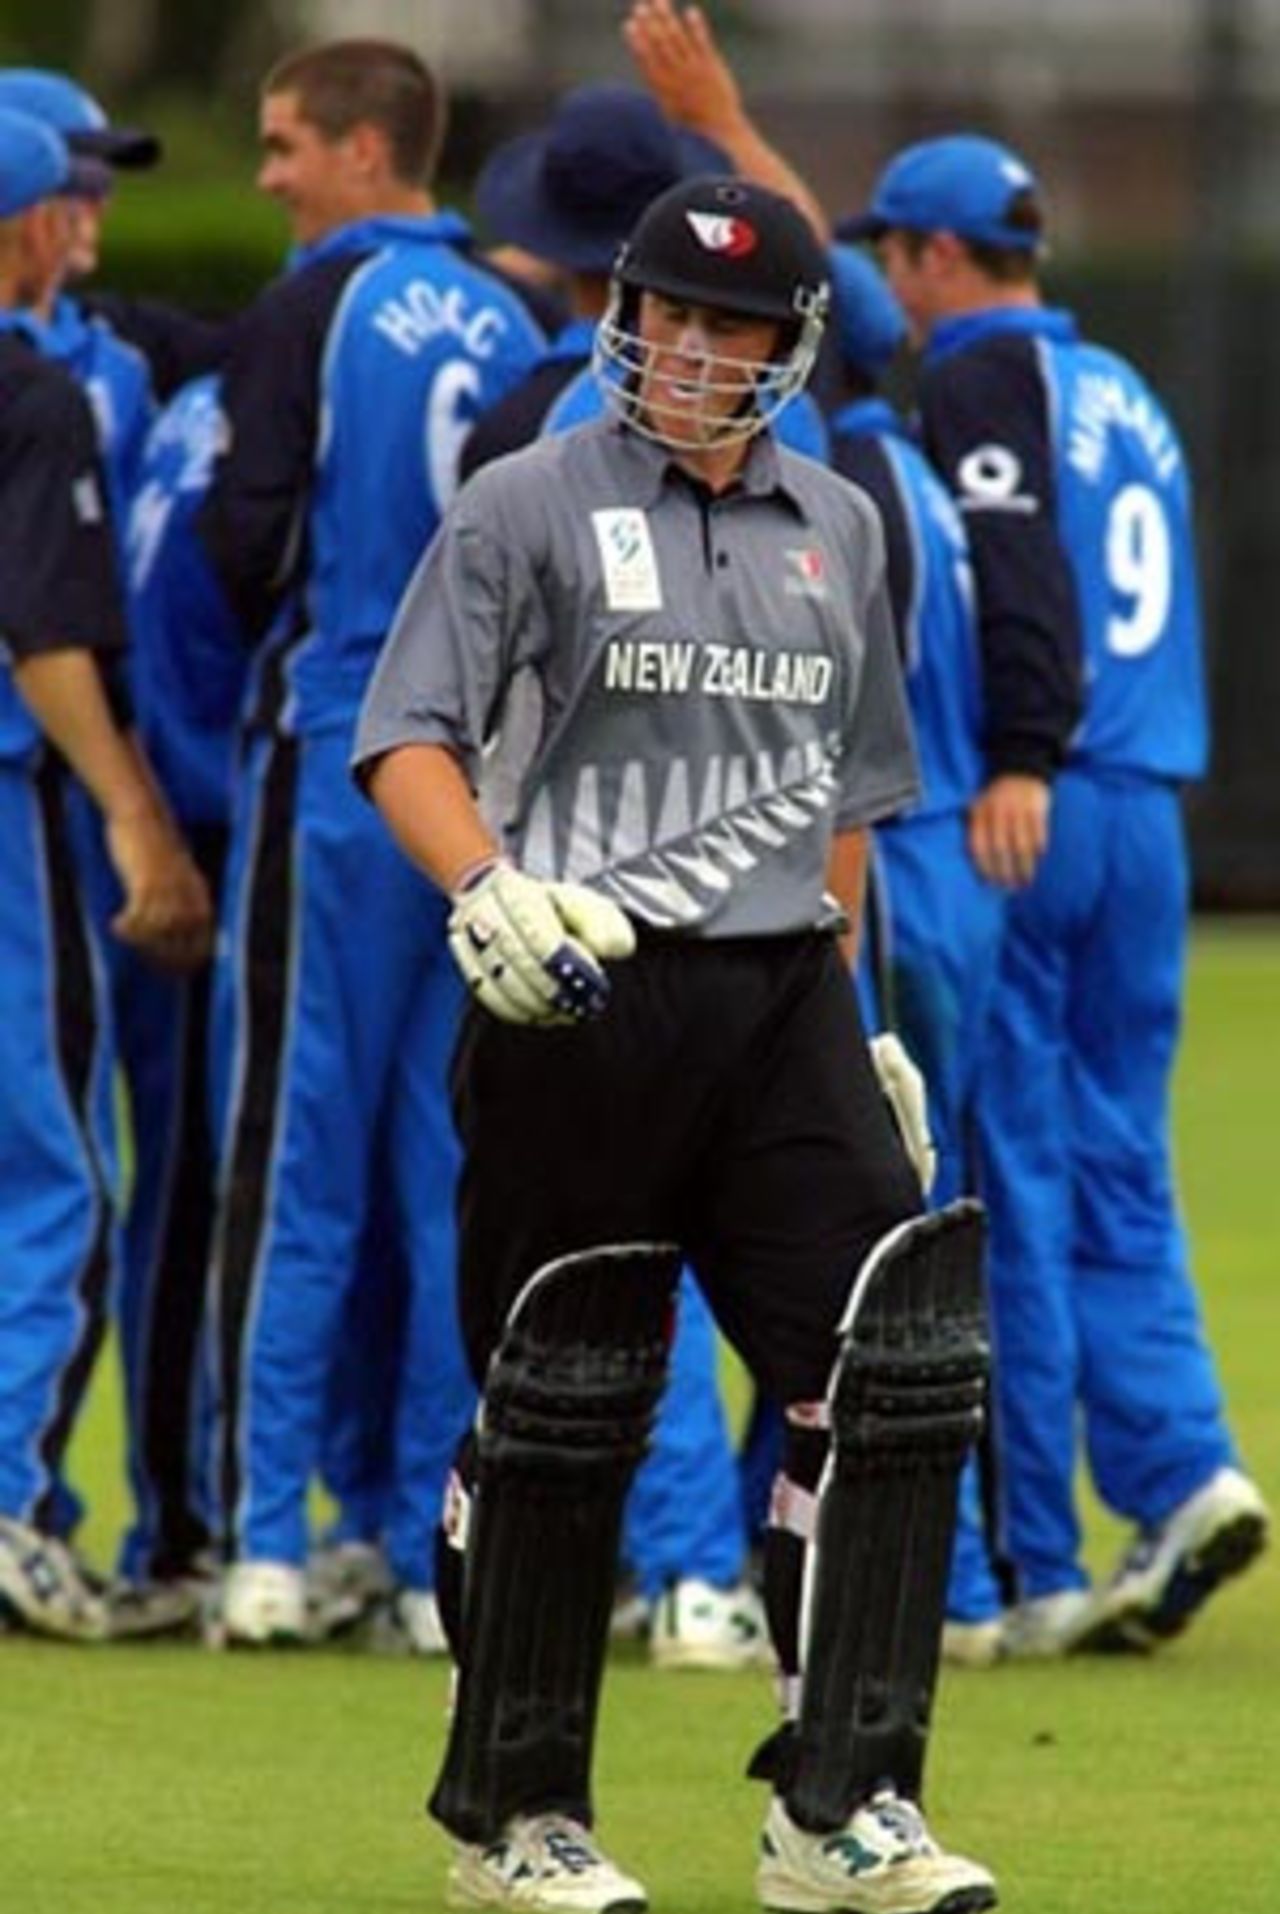 New Zealand Under-19 batsman Jordan Sheed walks from the field after being dismissed as England Under-19 players celebrate in the background. Sheed was caught by wicket-keeper Stephen Pope from the bowling of Kyle Hogg for one. ICC Under-19 World Cup Super League Group 2: England Under-19s v New Zealand Under-19s at Lincoln No. 3, Lincoln, 28 January 2002.